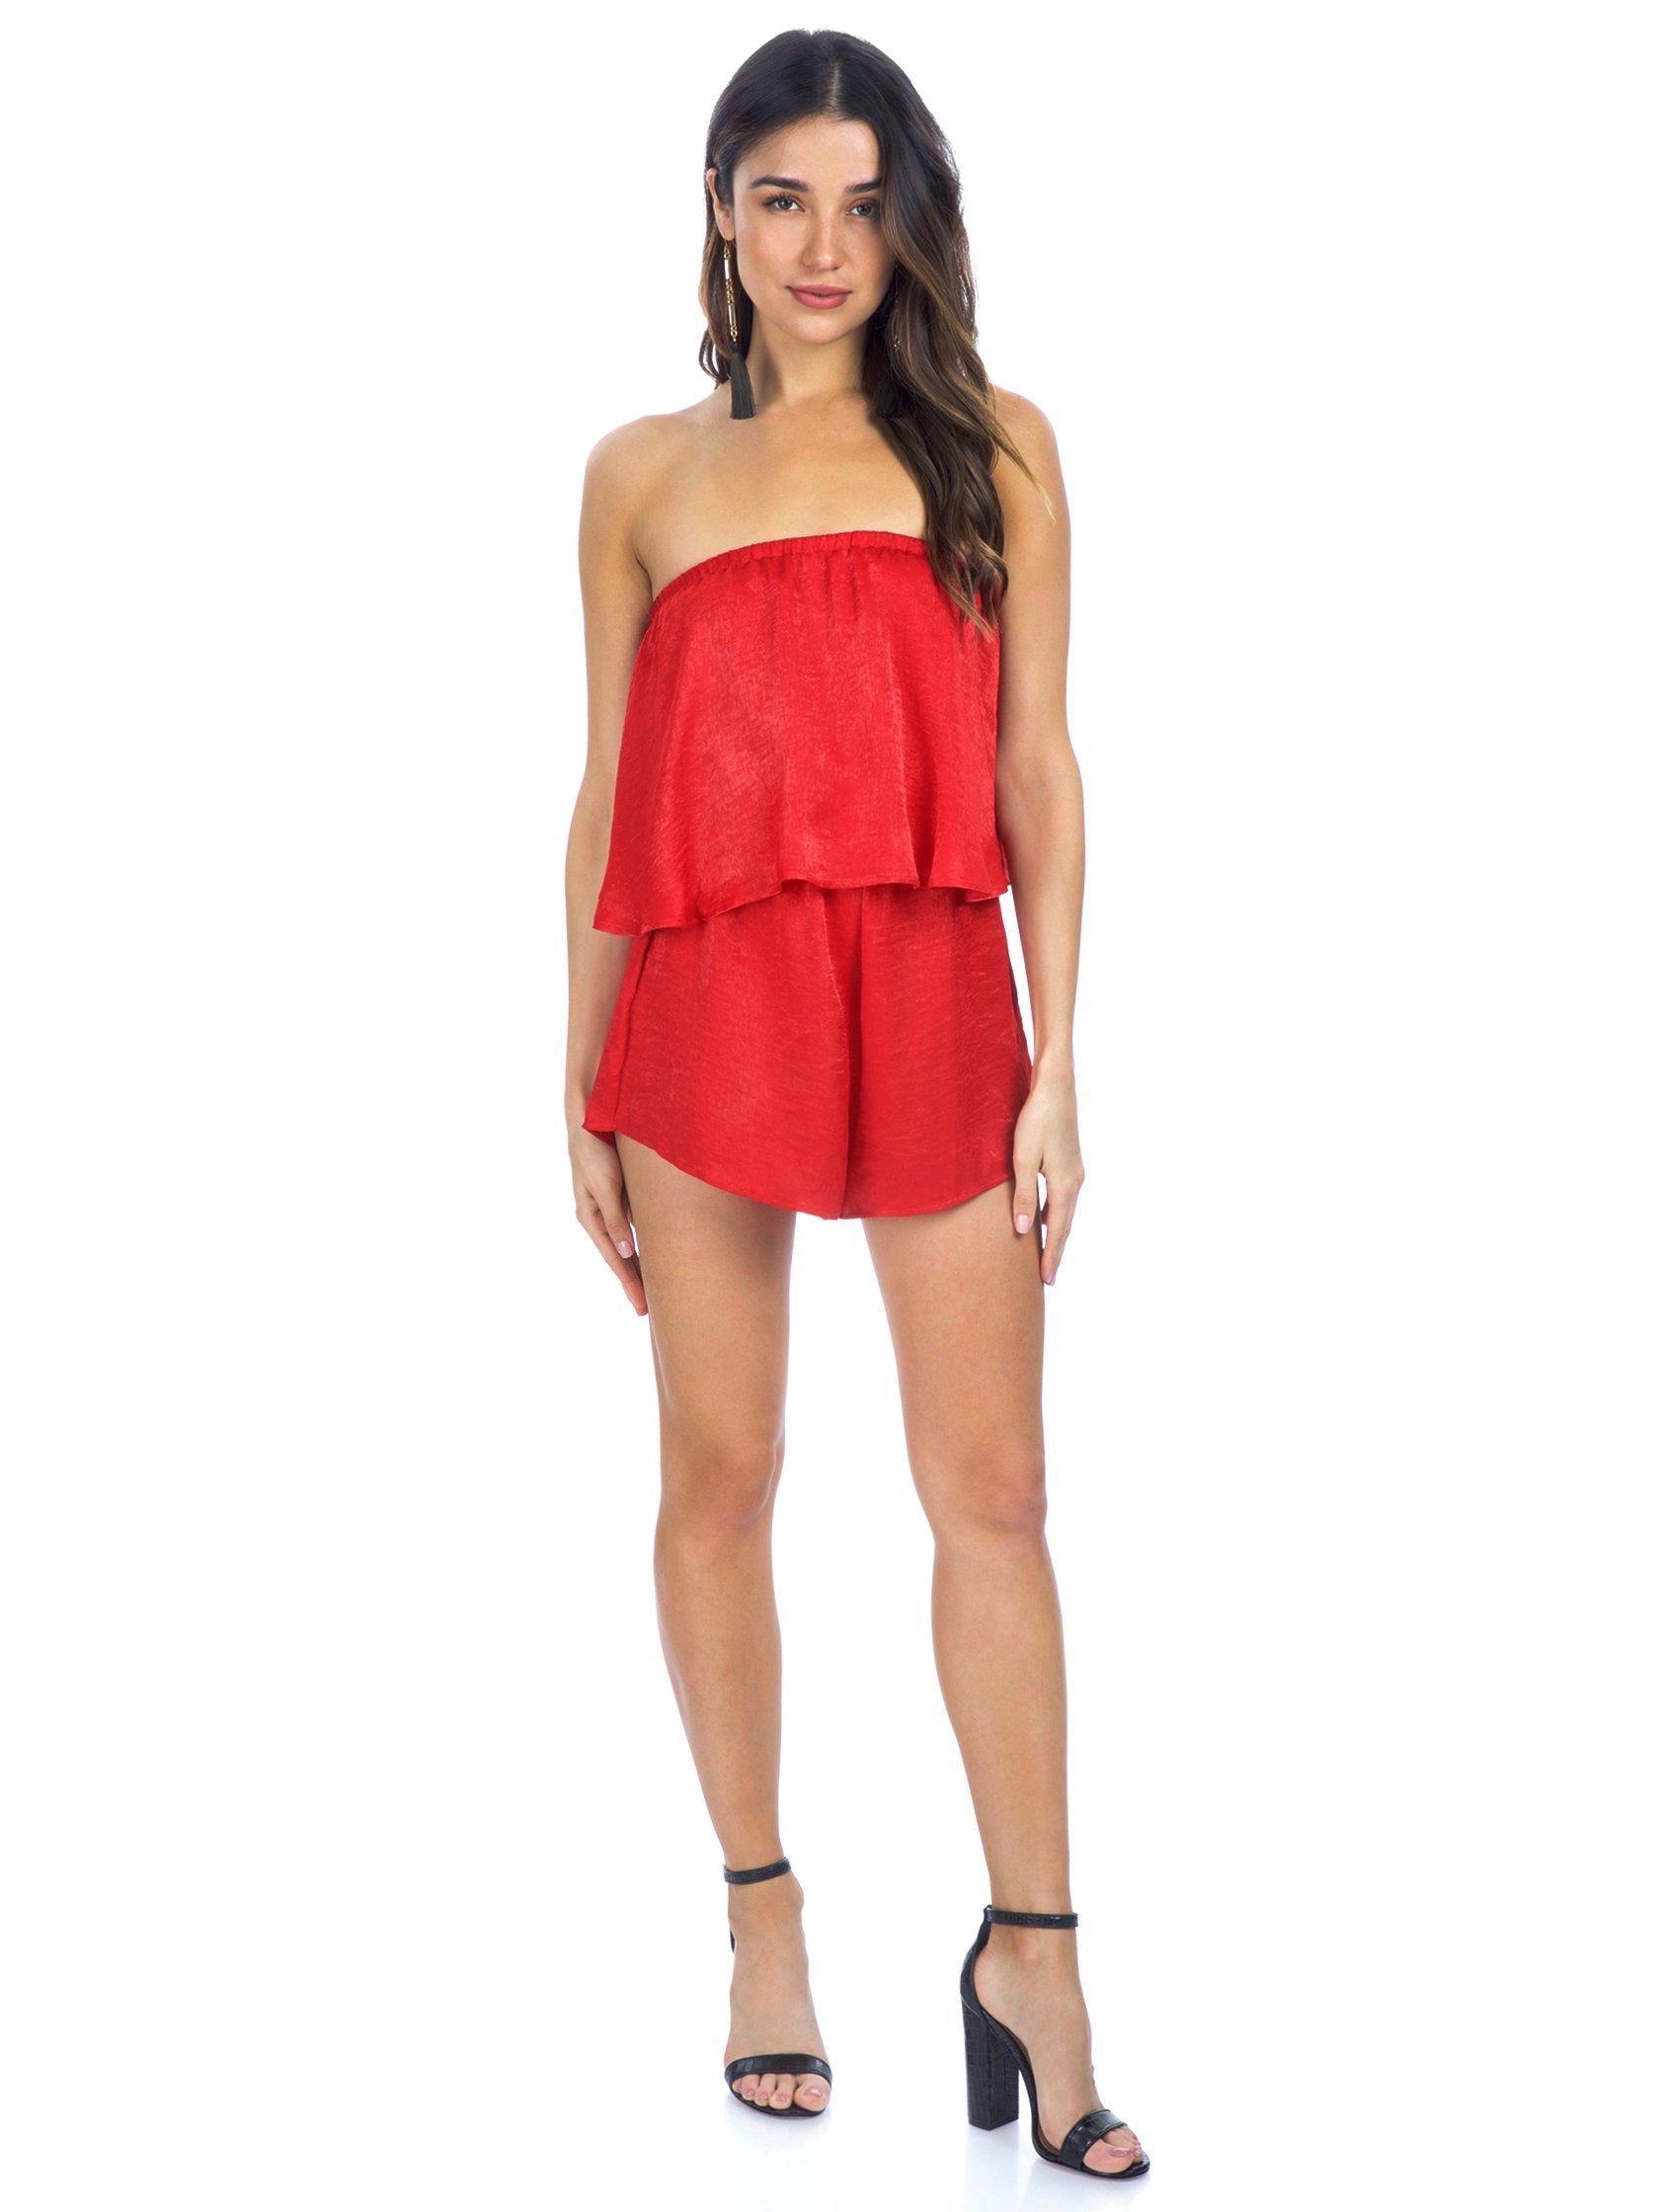 Girl outfit in a romper rental from Show Me Your Mumu called Thelma Romper